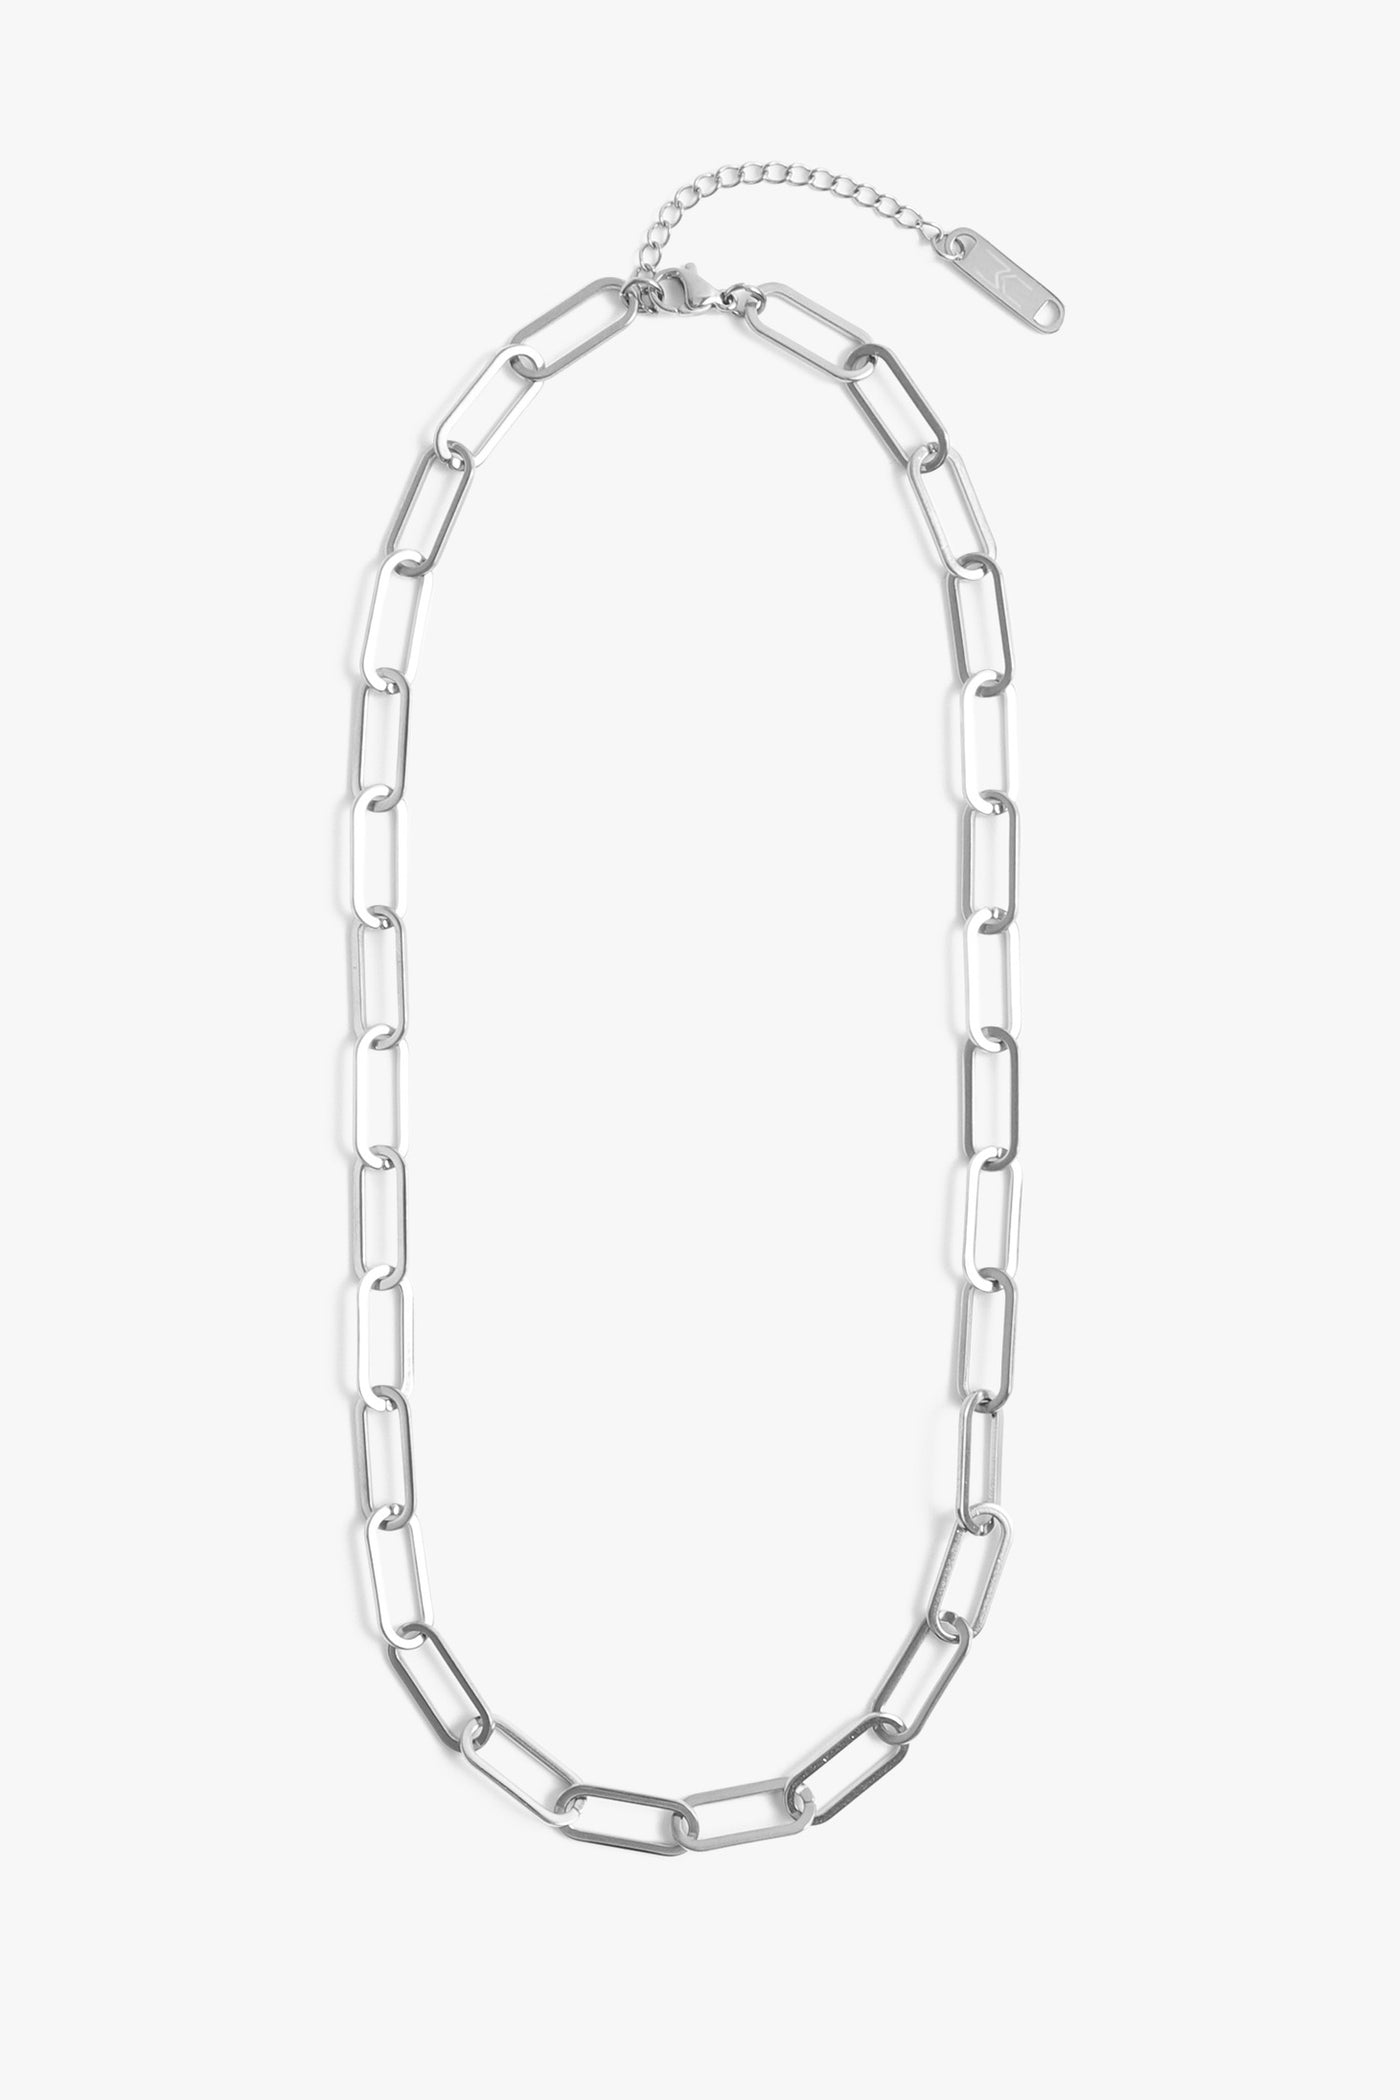 Marrin Costello Jewelry Ochse Chain paperclip chain necklace with lobster clasp closure and extender. Waterproof, sustainable, hypoallergenic. Polished stainless steel.